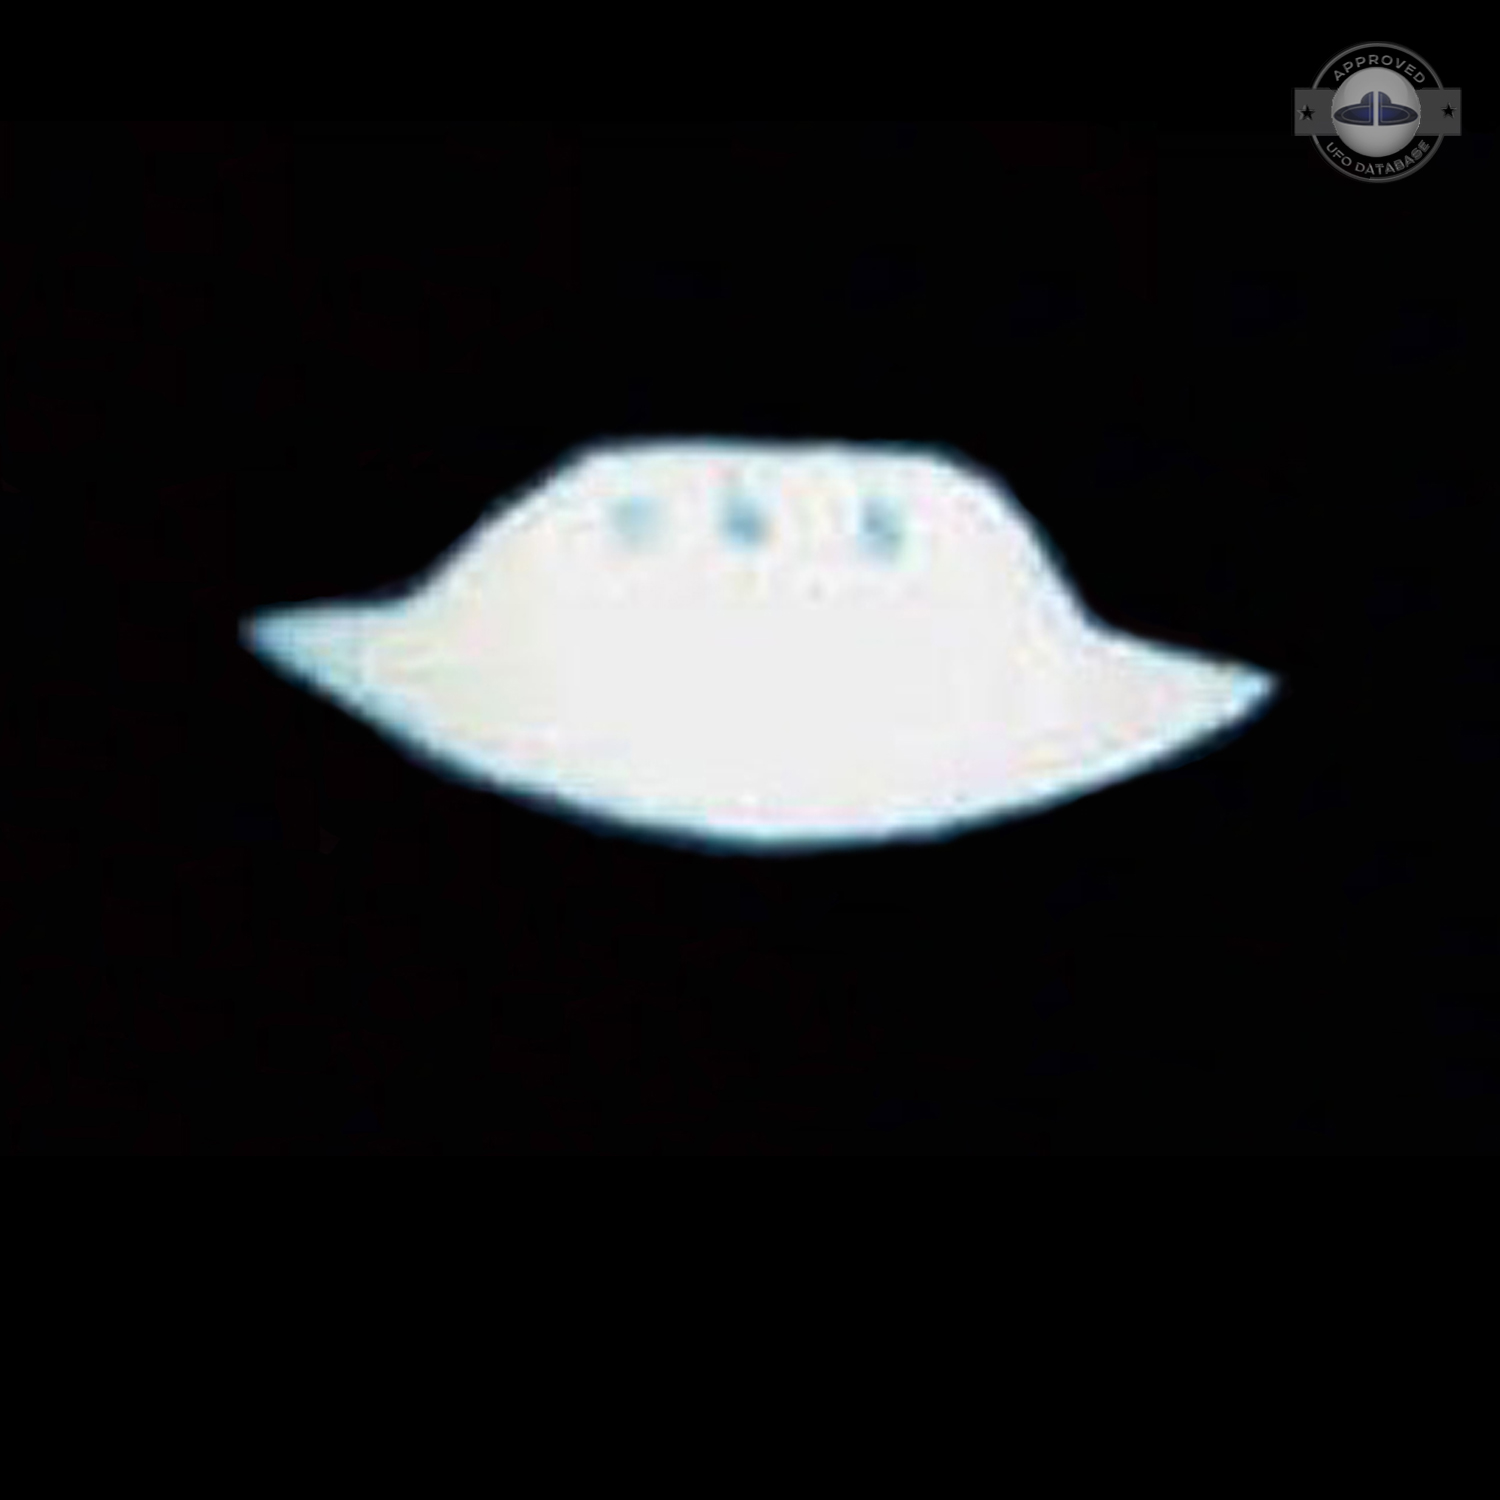 Iran 1978 UFO picture released under the Freedom of Information Act UFO Picture #231-2